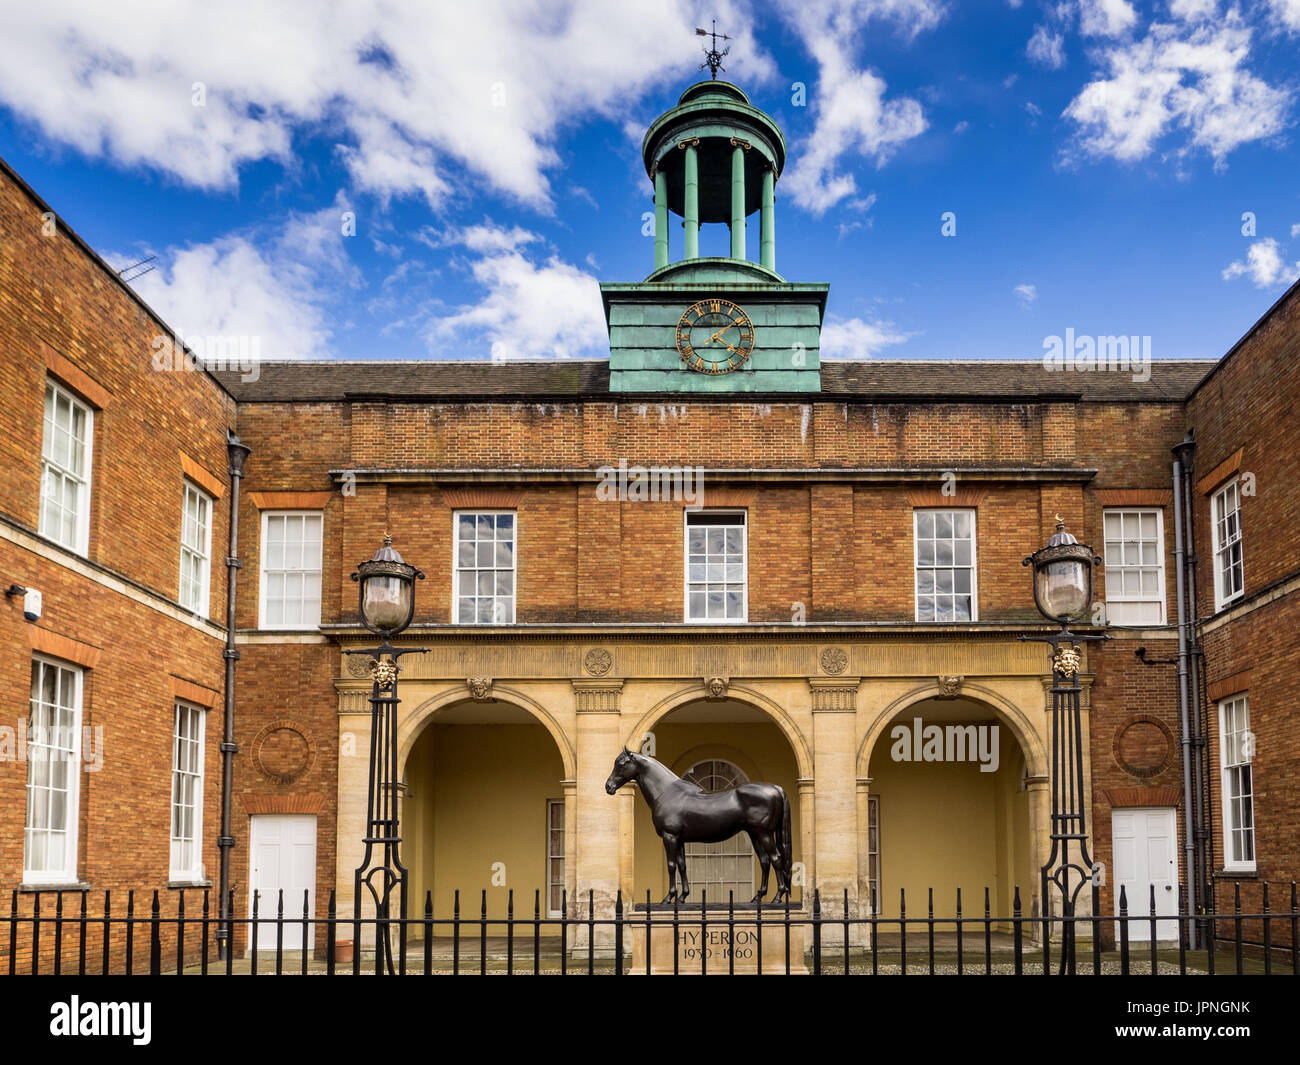 Jockey Club Newmarket - Front Facade of the Jockey Club Rooms in Newmarket Suffolk with a statue of Hyperion, a famous Newmarket horse. Stock Photo